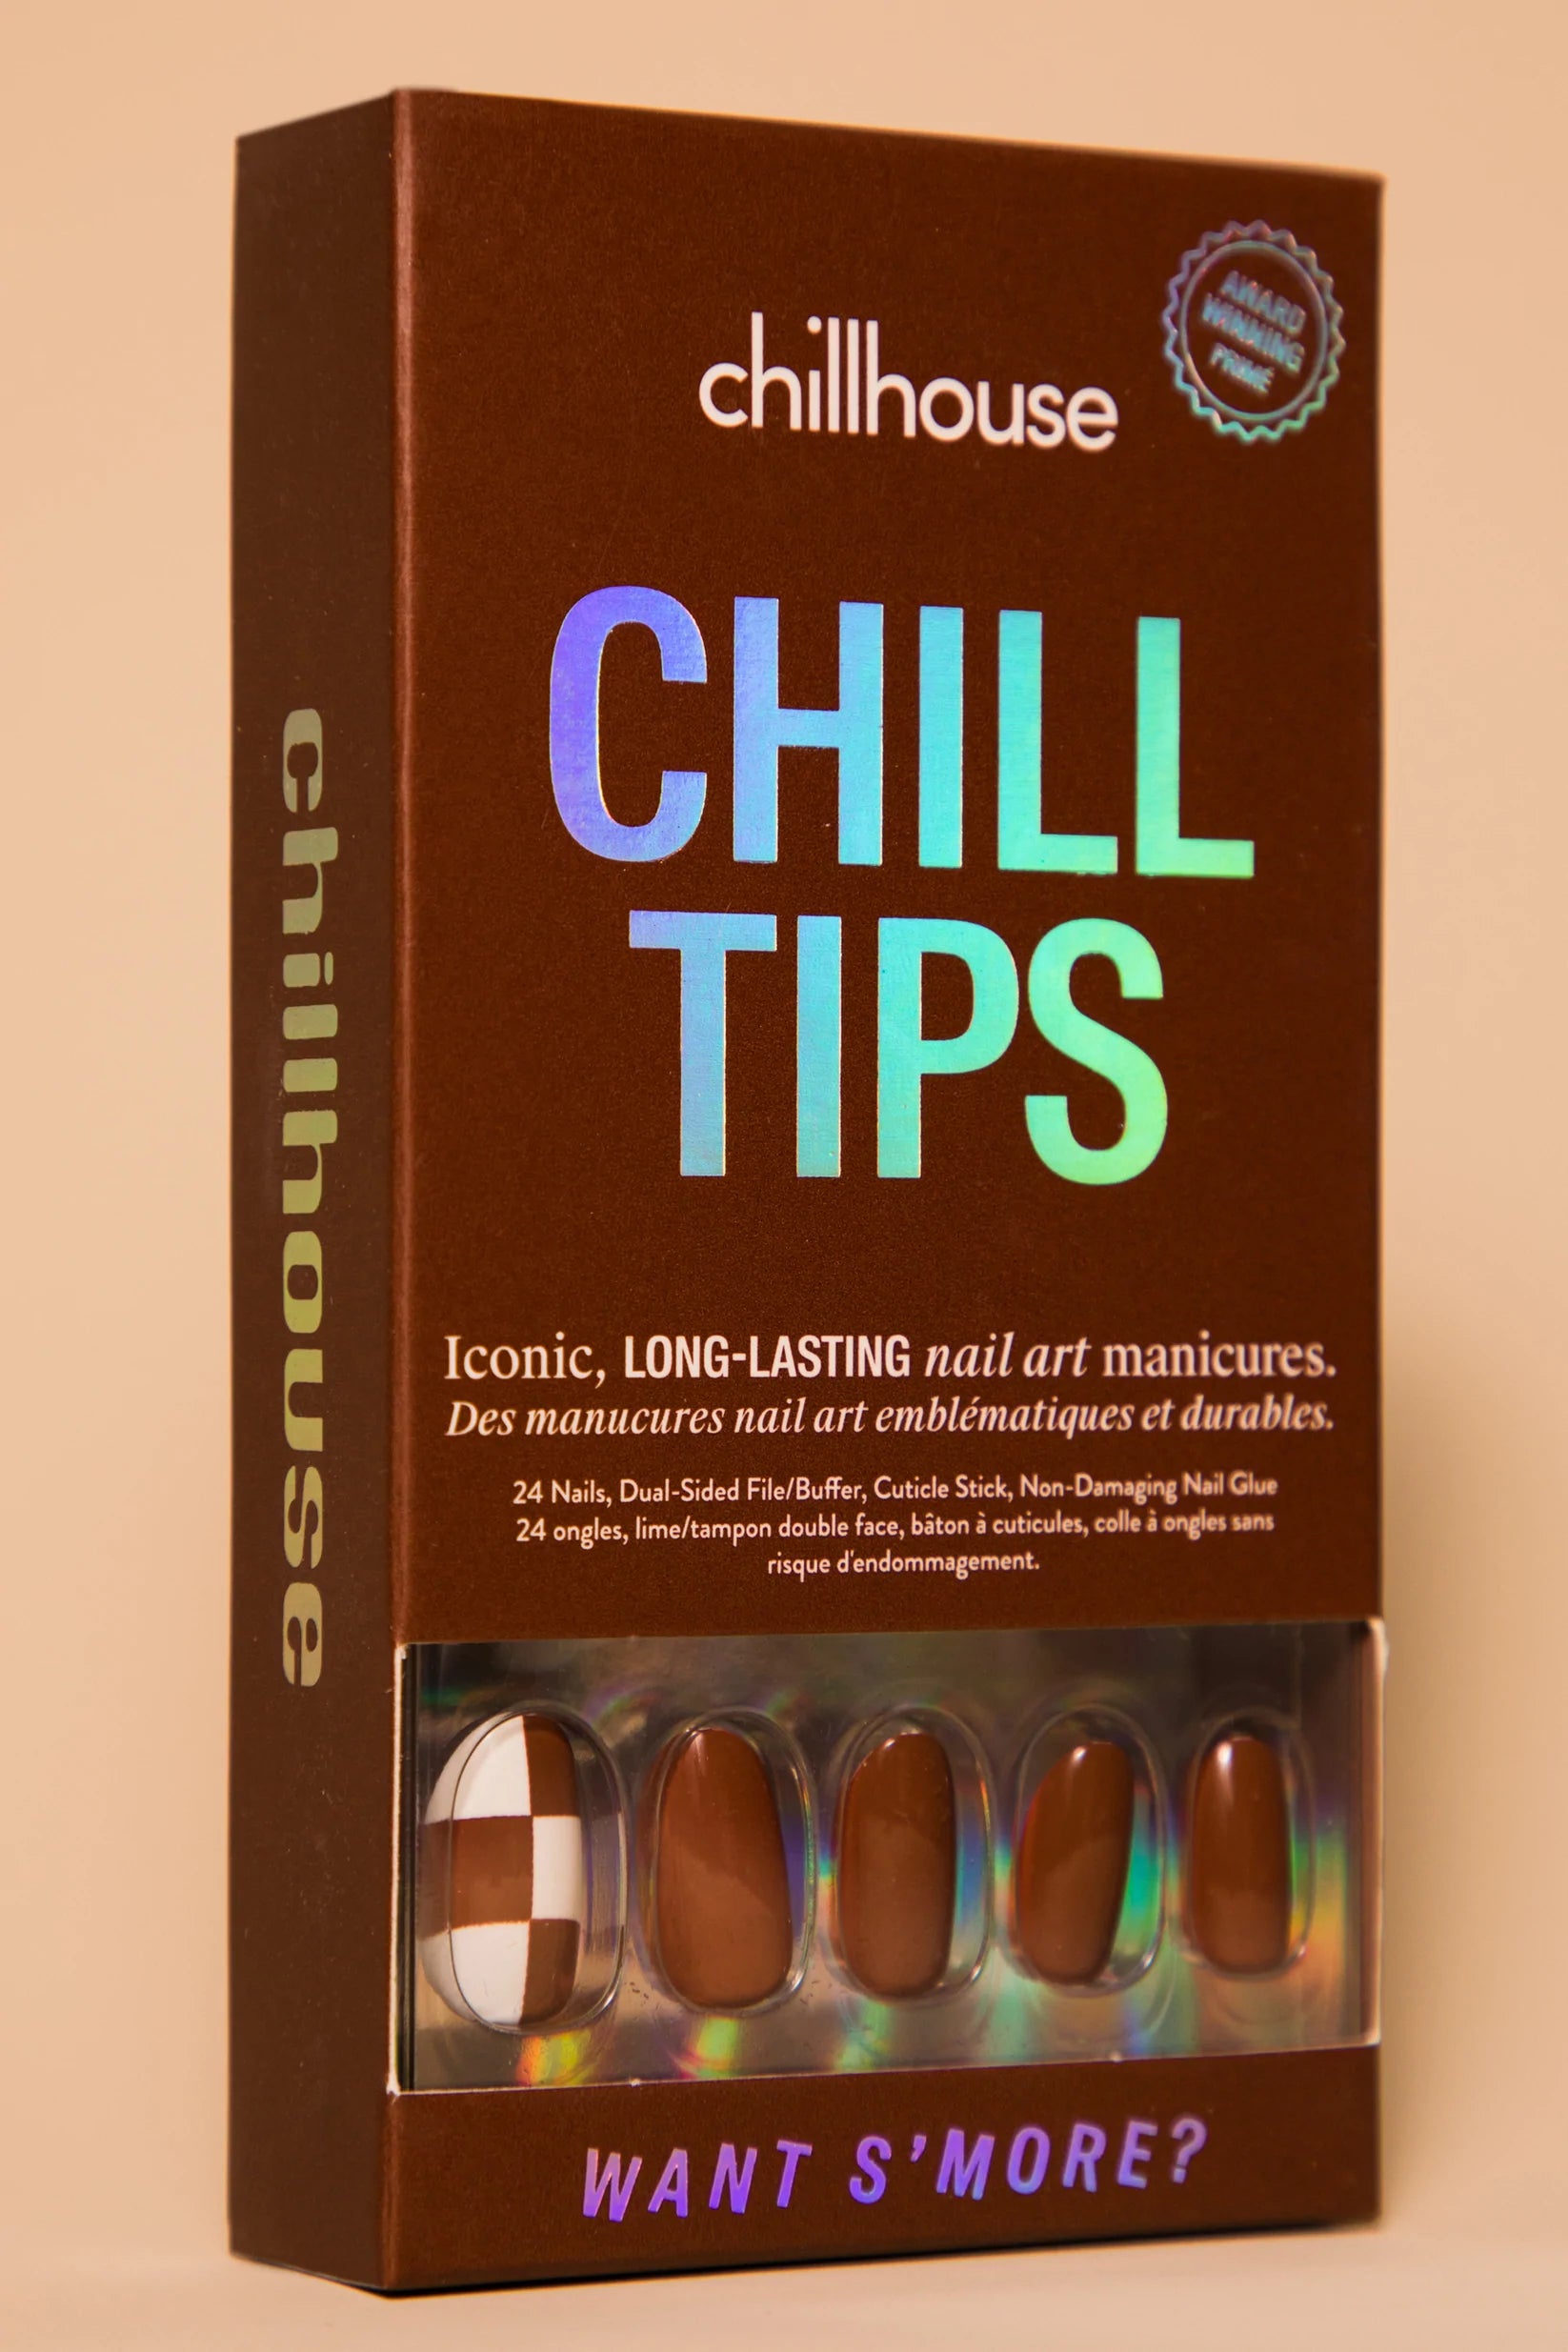 Chillhouse Chill Tips Want S'More? | Prelude & Dawn | Los Angeles, CA